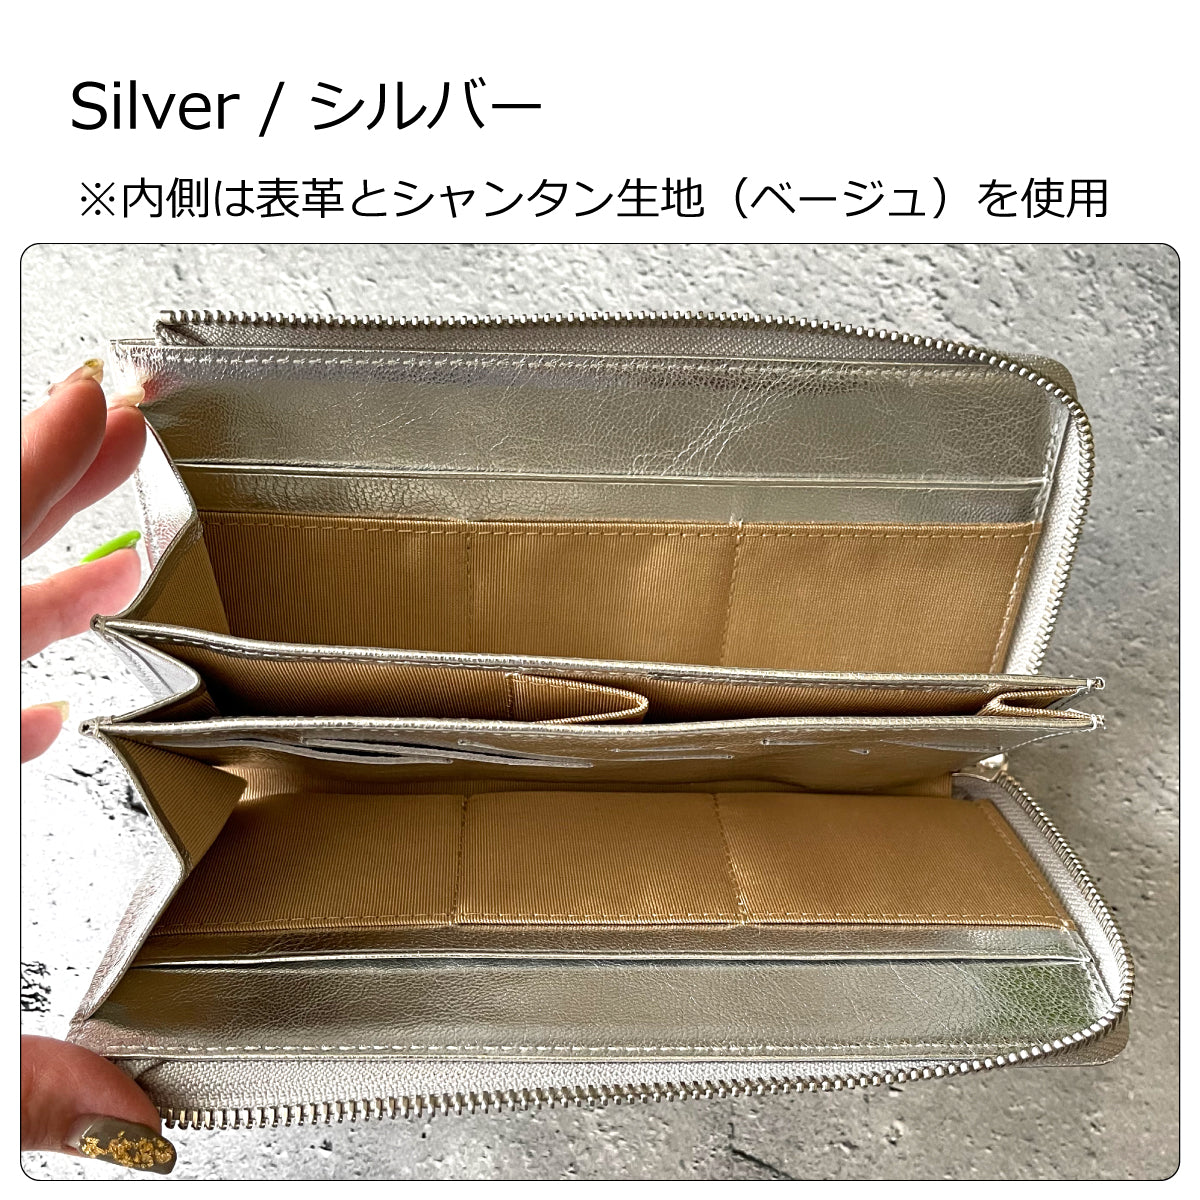 【...to®・PROUDY】Gold & Silver・「最大収納30枚」を膨らまずに収納可能。カード28枚が「美しく並ぶ」整う長財布  全2色